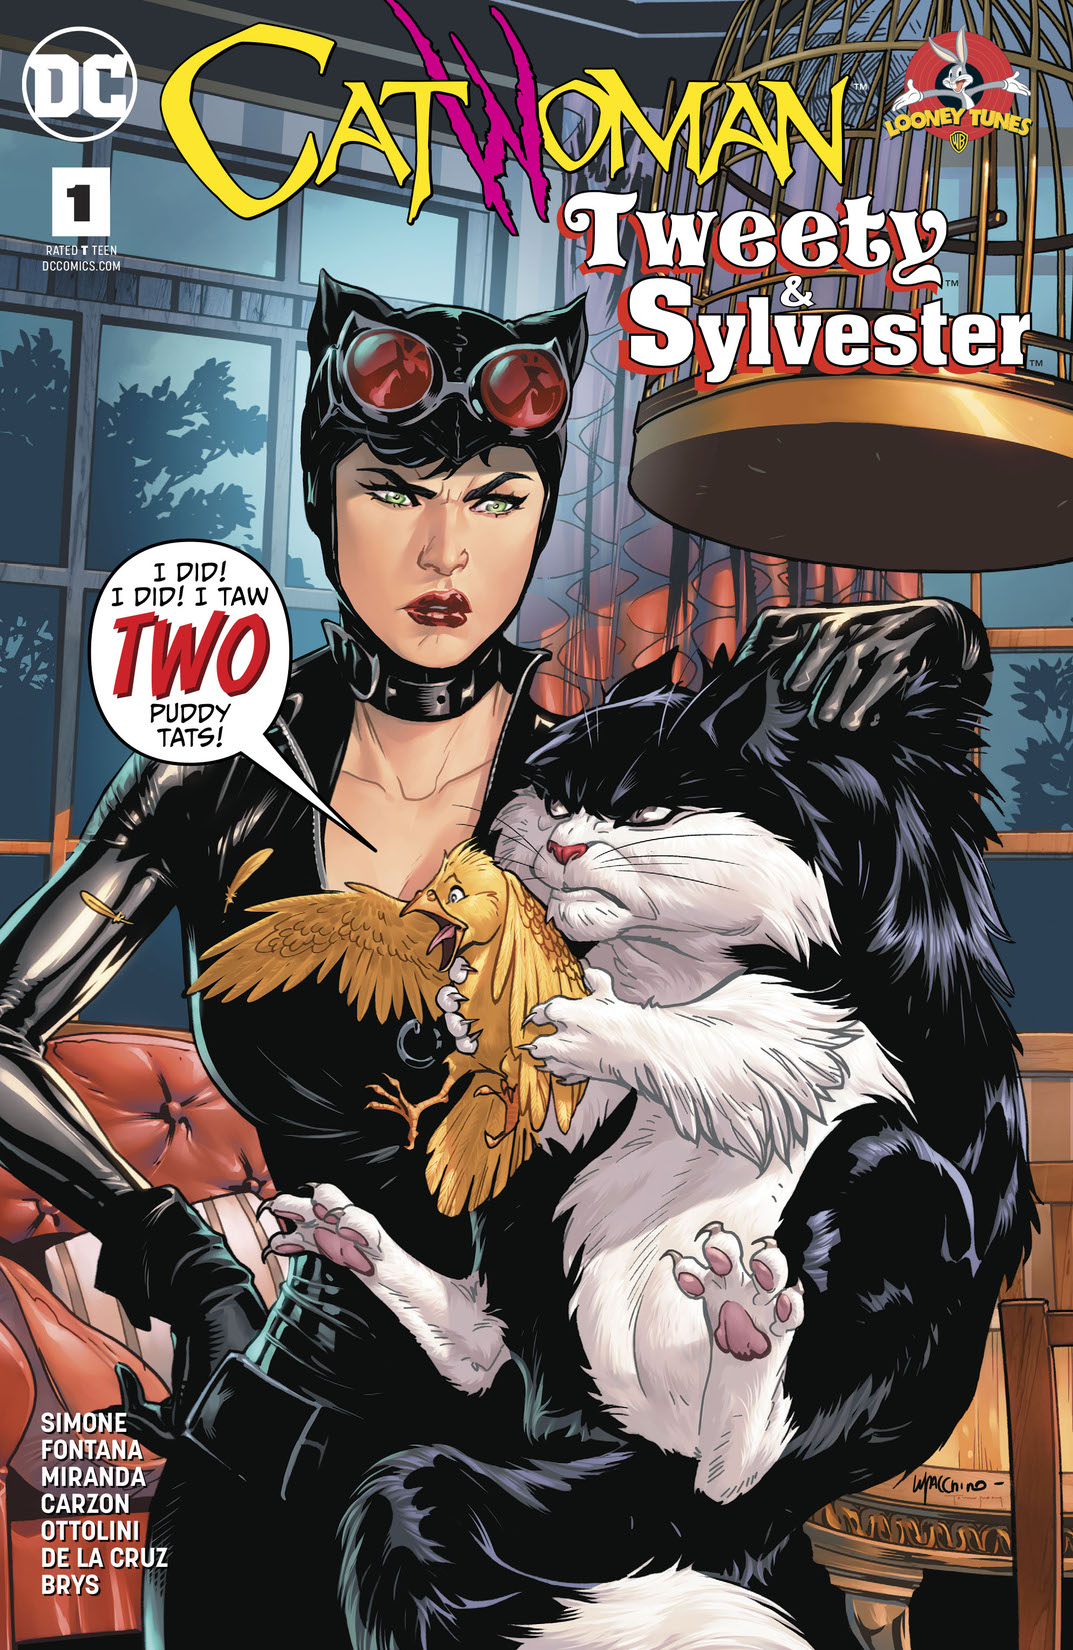 Catwoman/Tweety and Sylvester #1 preview images